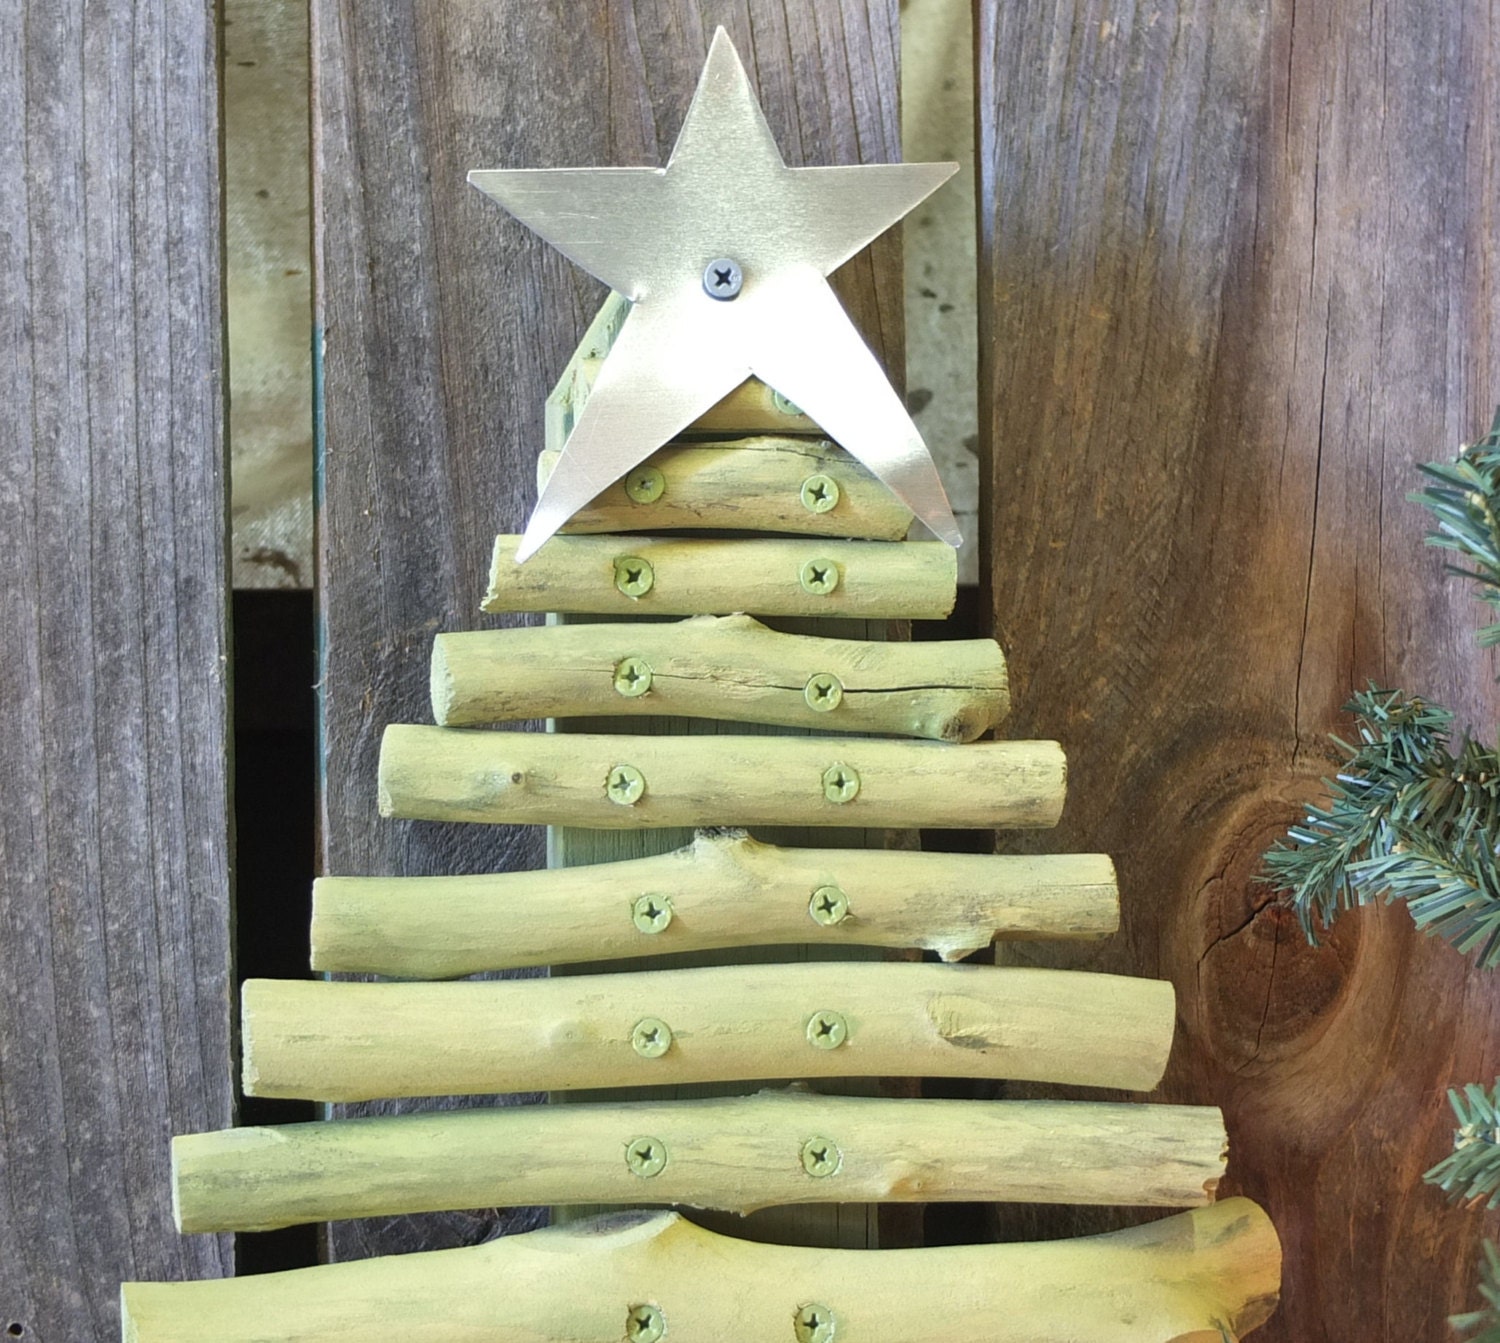 Rustic Barn Wood Christmas Tree Handmade from Reclaimed Wood -  coutnry rustic Christmas decoration for home, barn, or gardening shed - SouvenirFarm